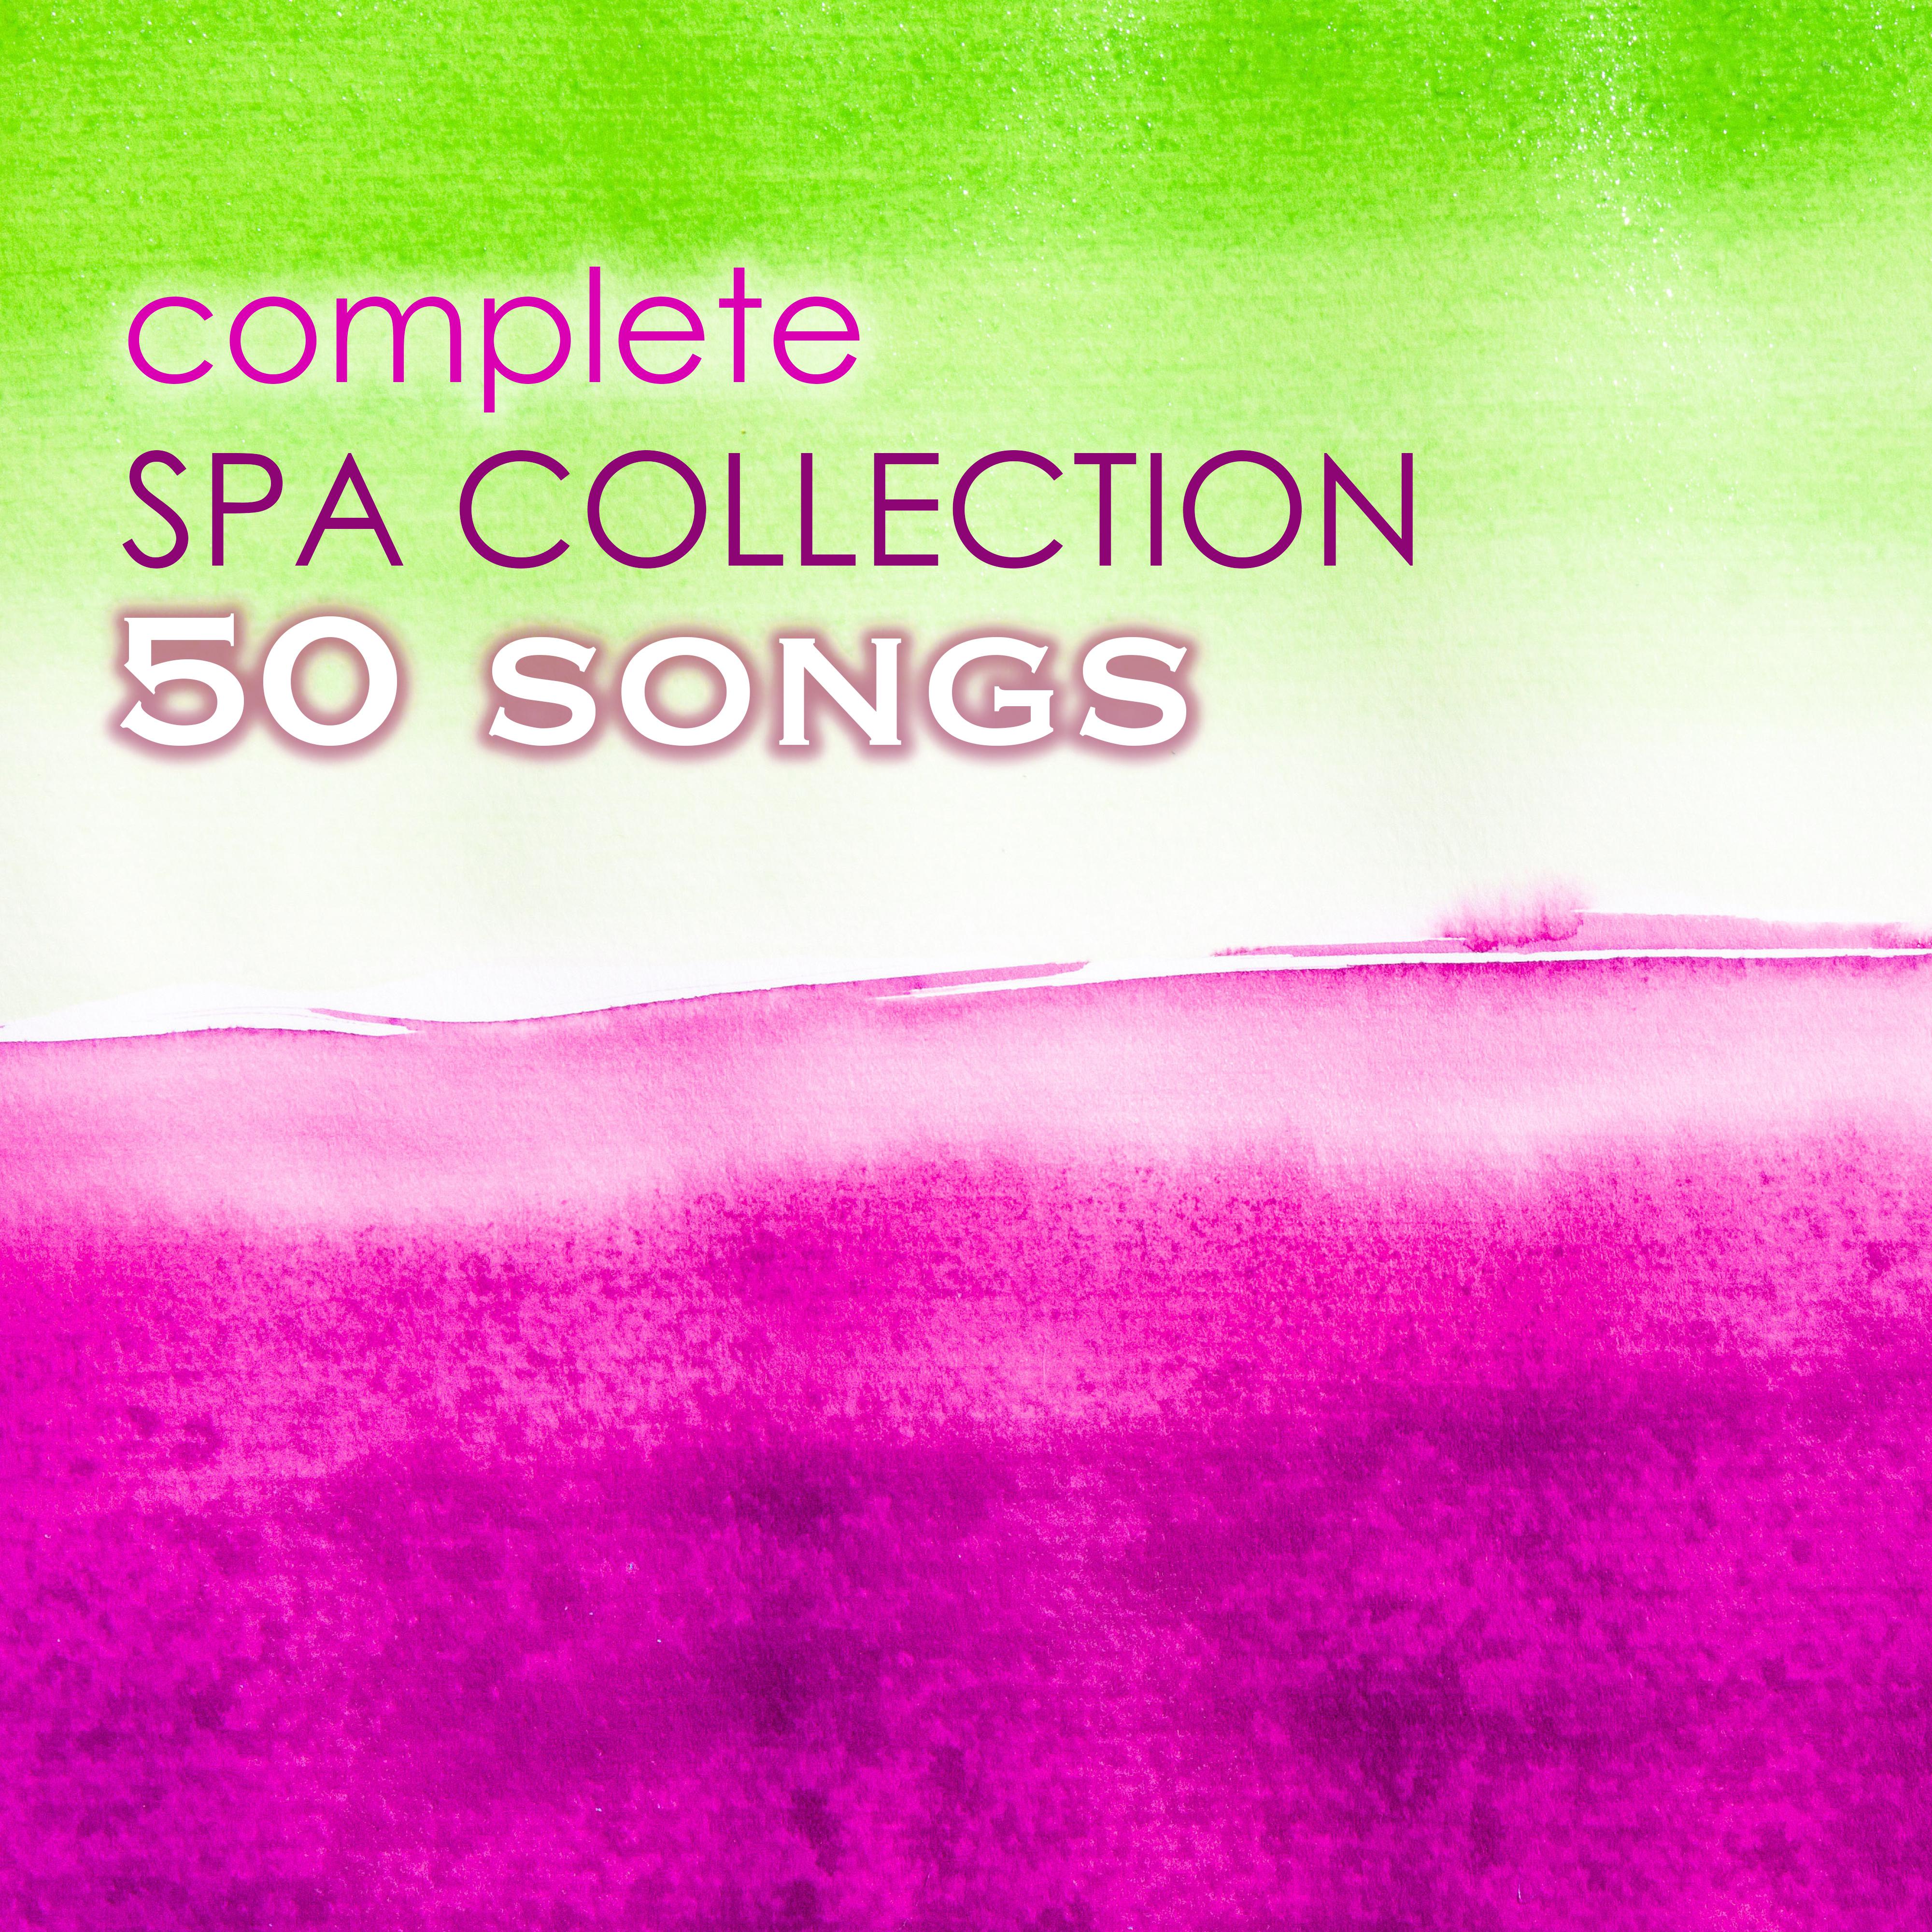 Complete Spa Collection 50 - The Best Massage, Meditation, Relaxation, Yoga and Wellness Center Ambient Music